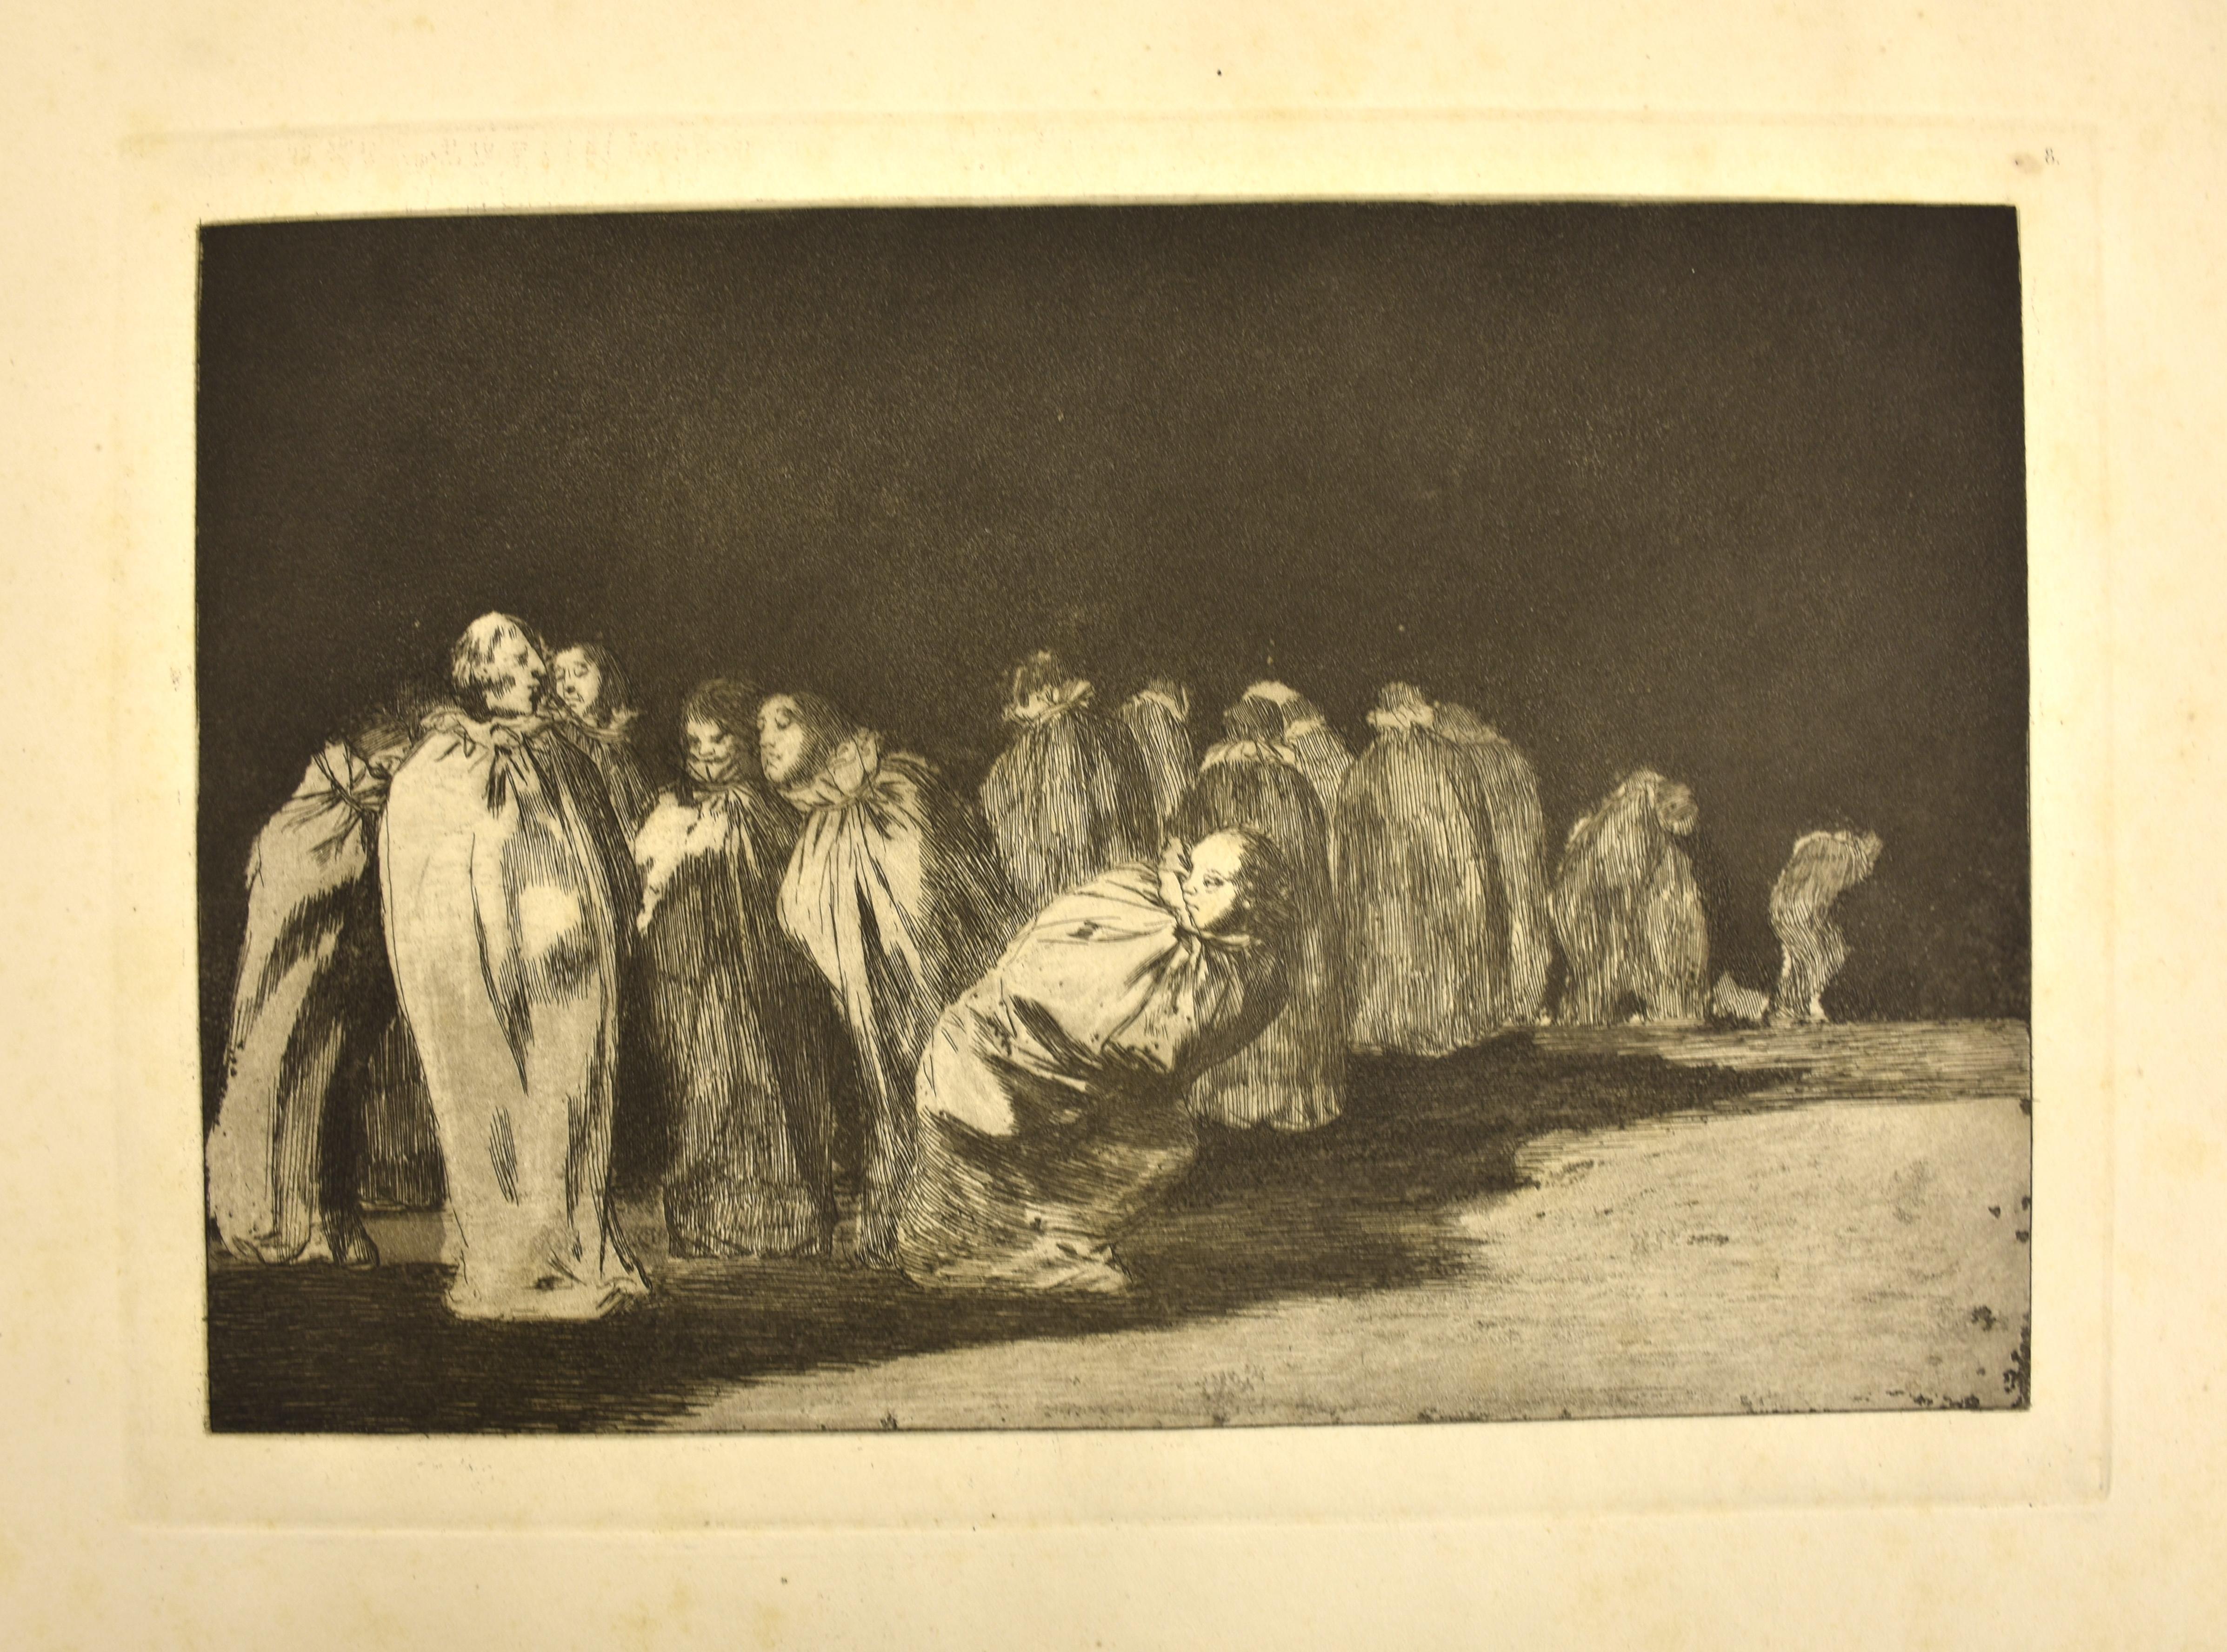 Complete Collection of Los Proverbios by Francisco Goya - 1875 1